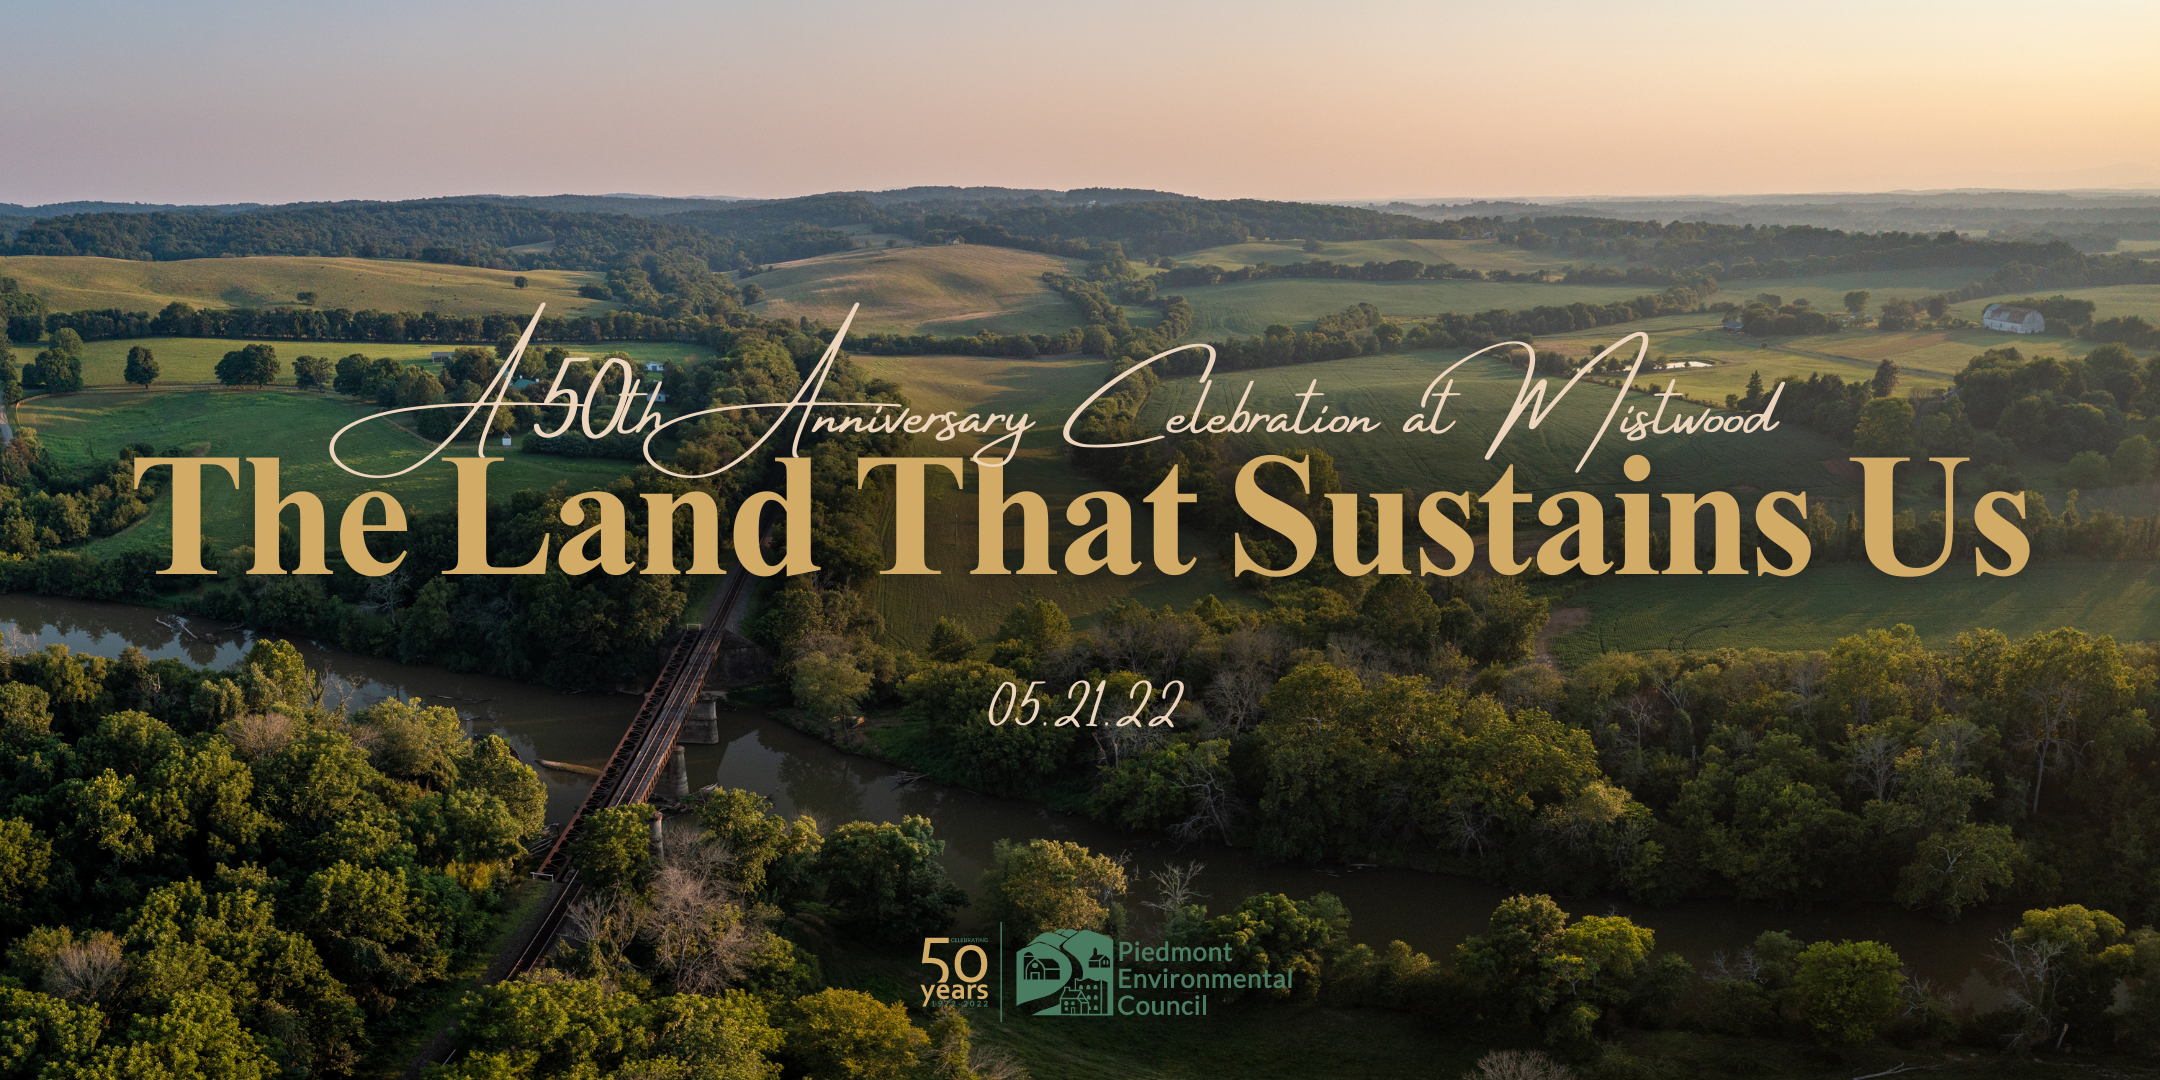 aerial image of conserved land near a river with text that sats "A 50th Anniversary Celebration at Mistwood: The Land That Sustains Us"